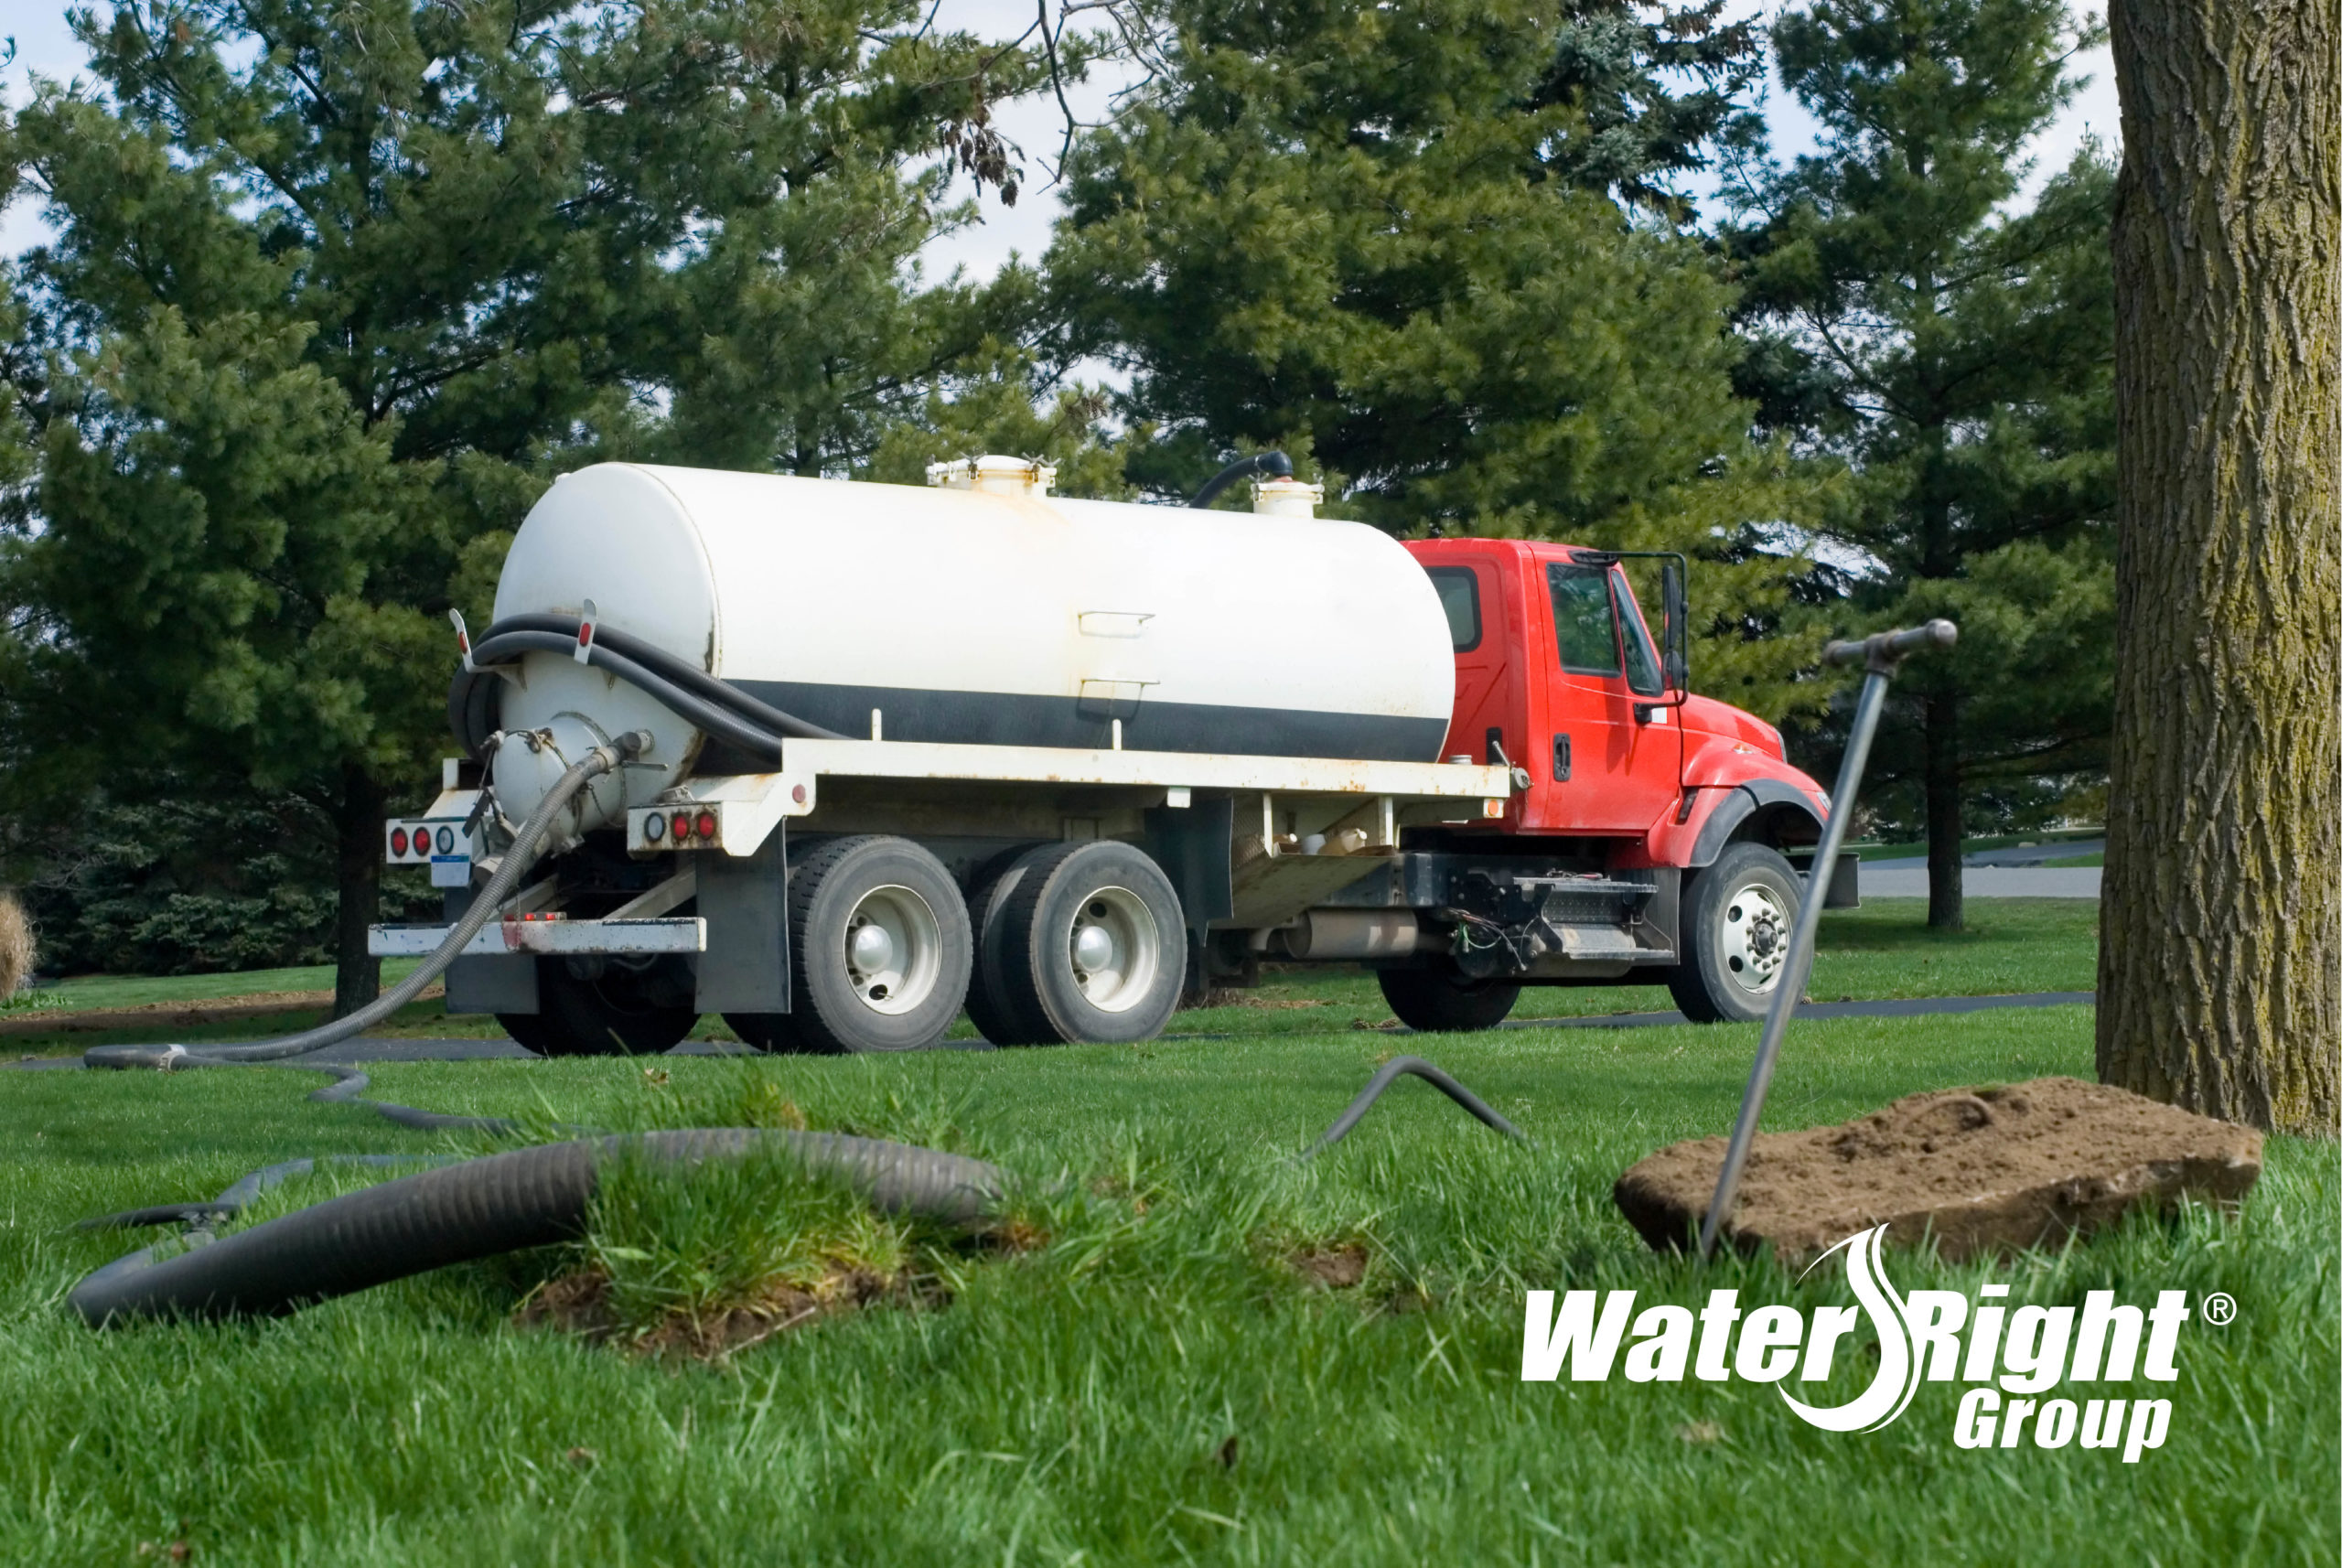 Should I Use a Water Softener When I Have a Septic System?